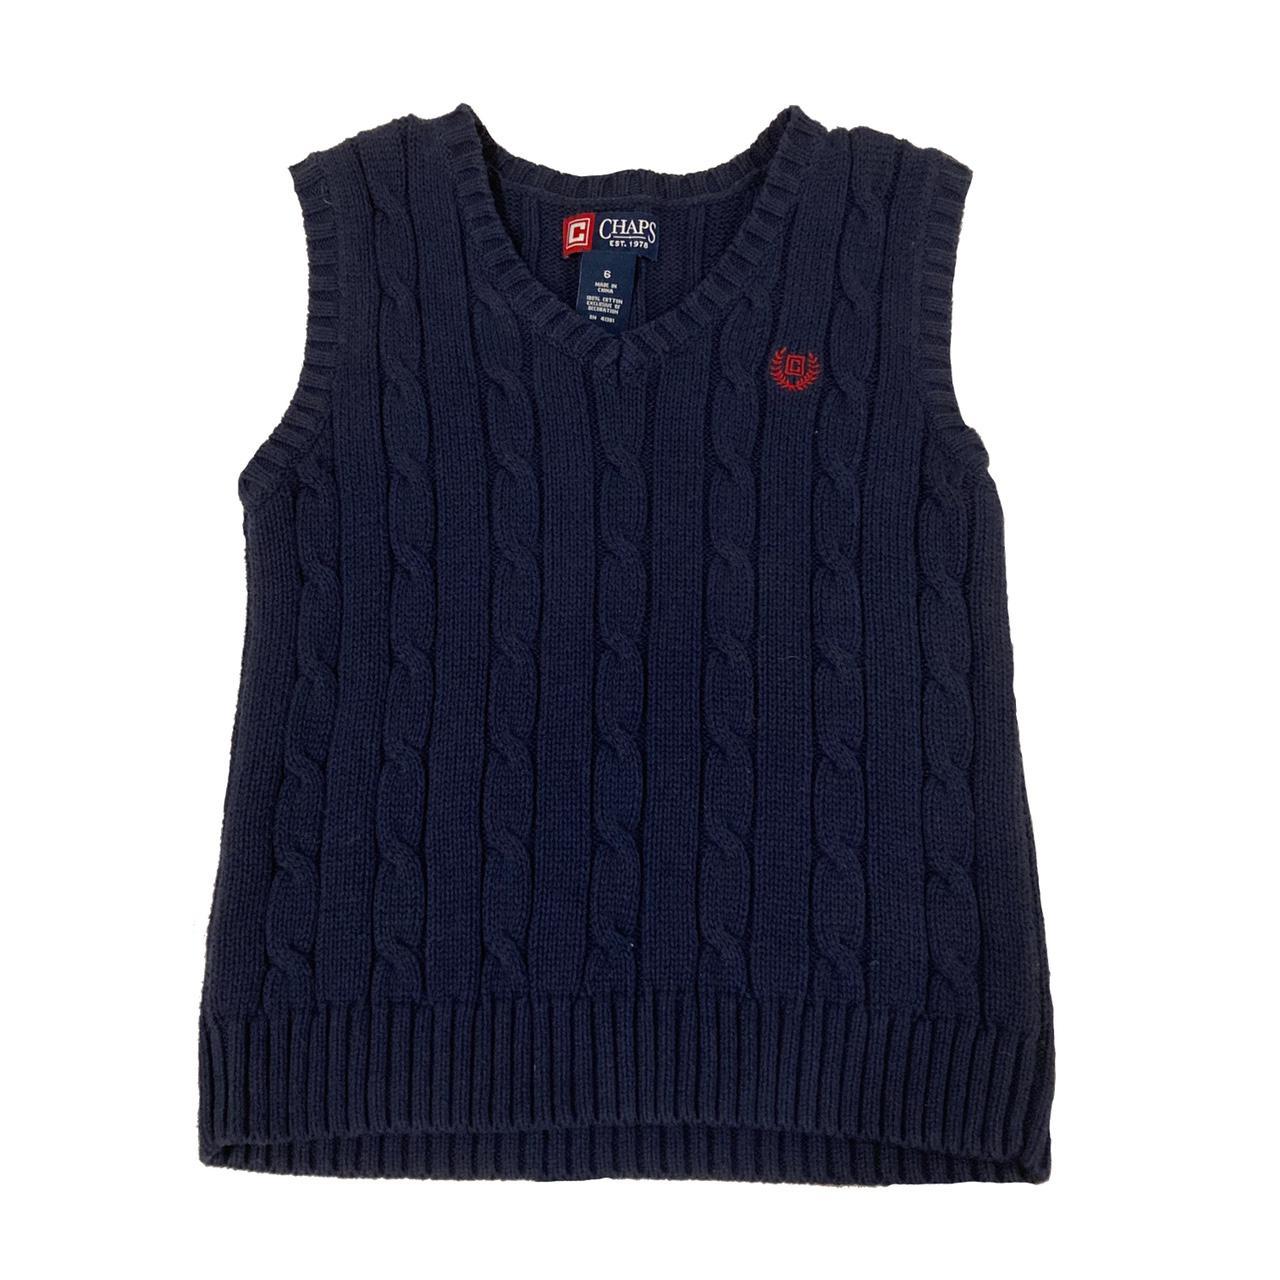 Product Image 1 - Simple navy blue mini sweater